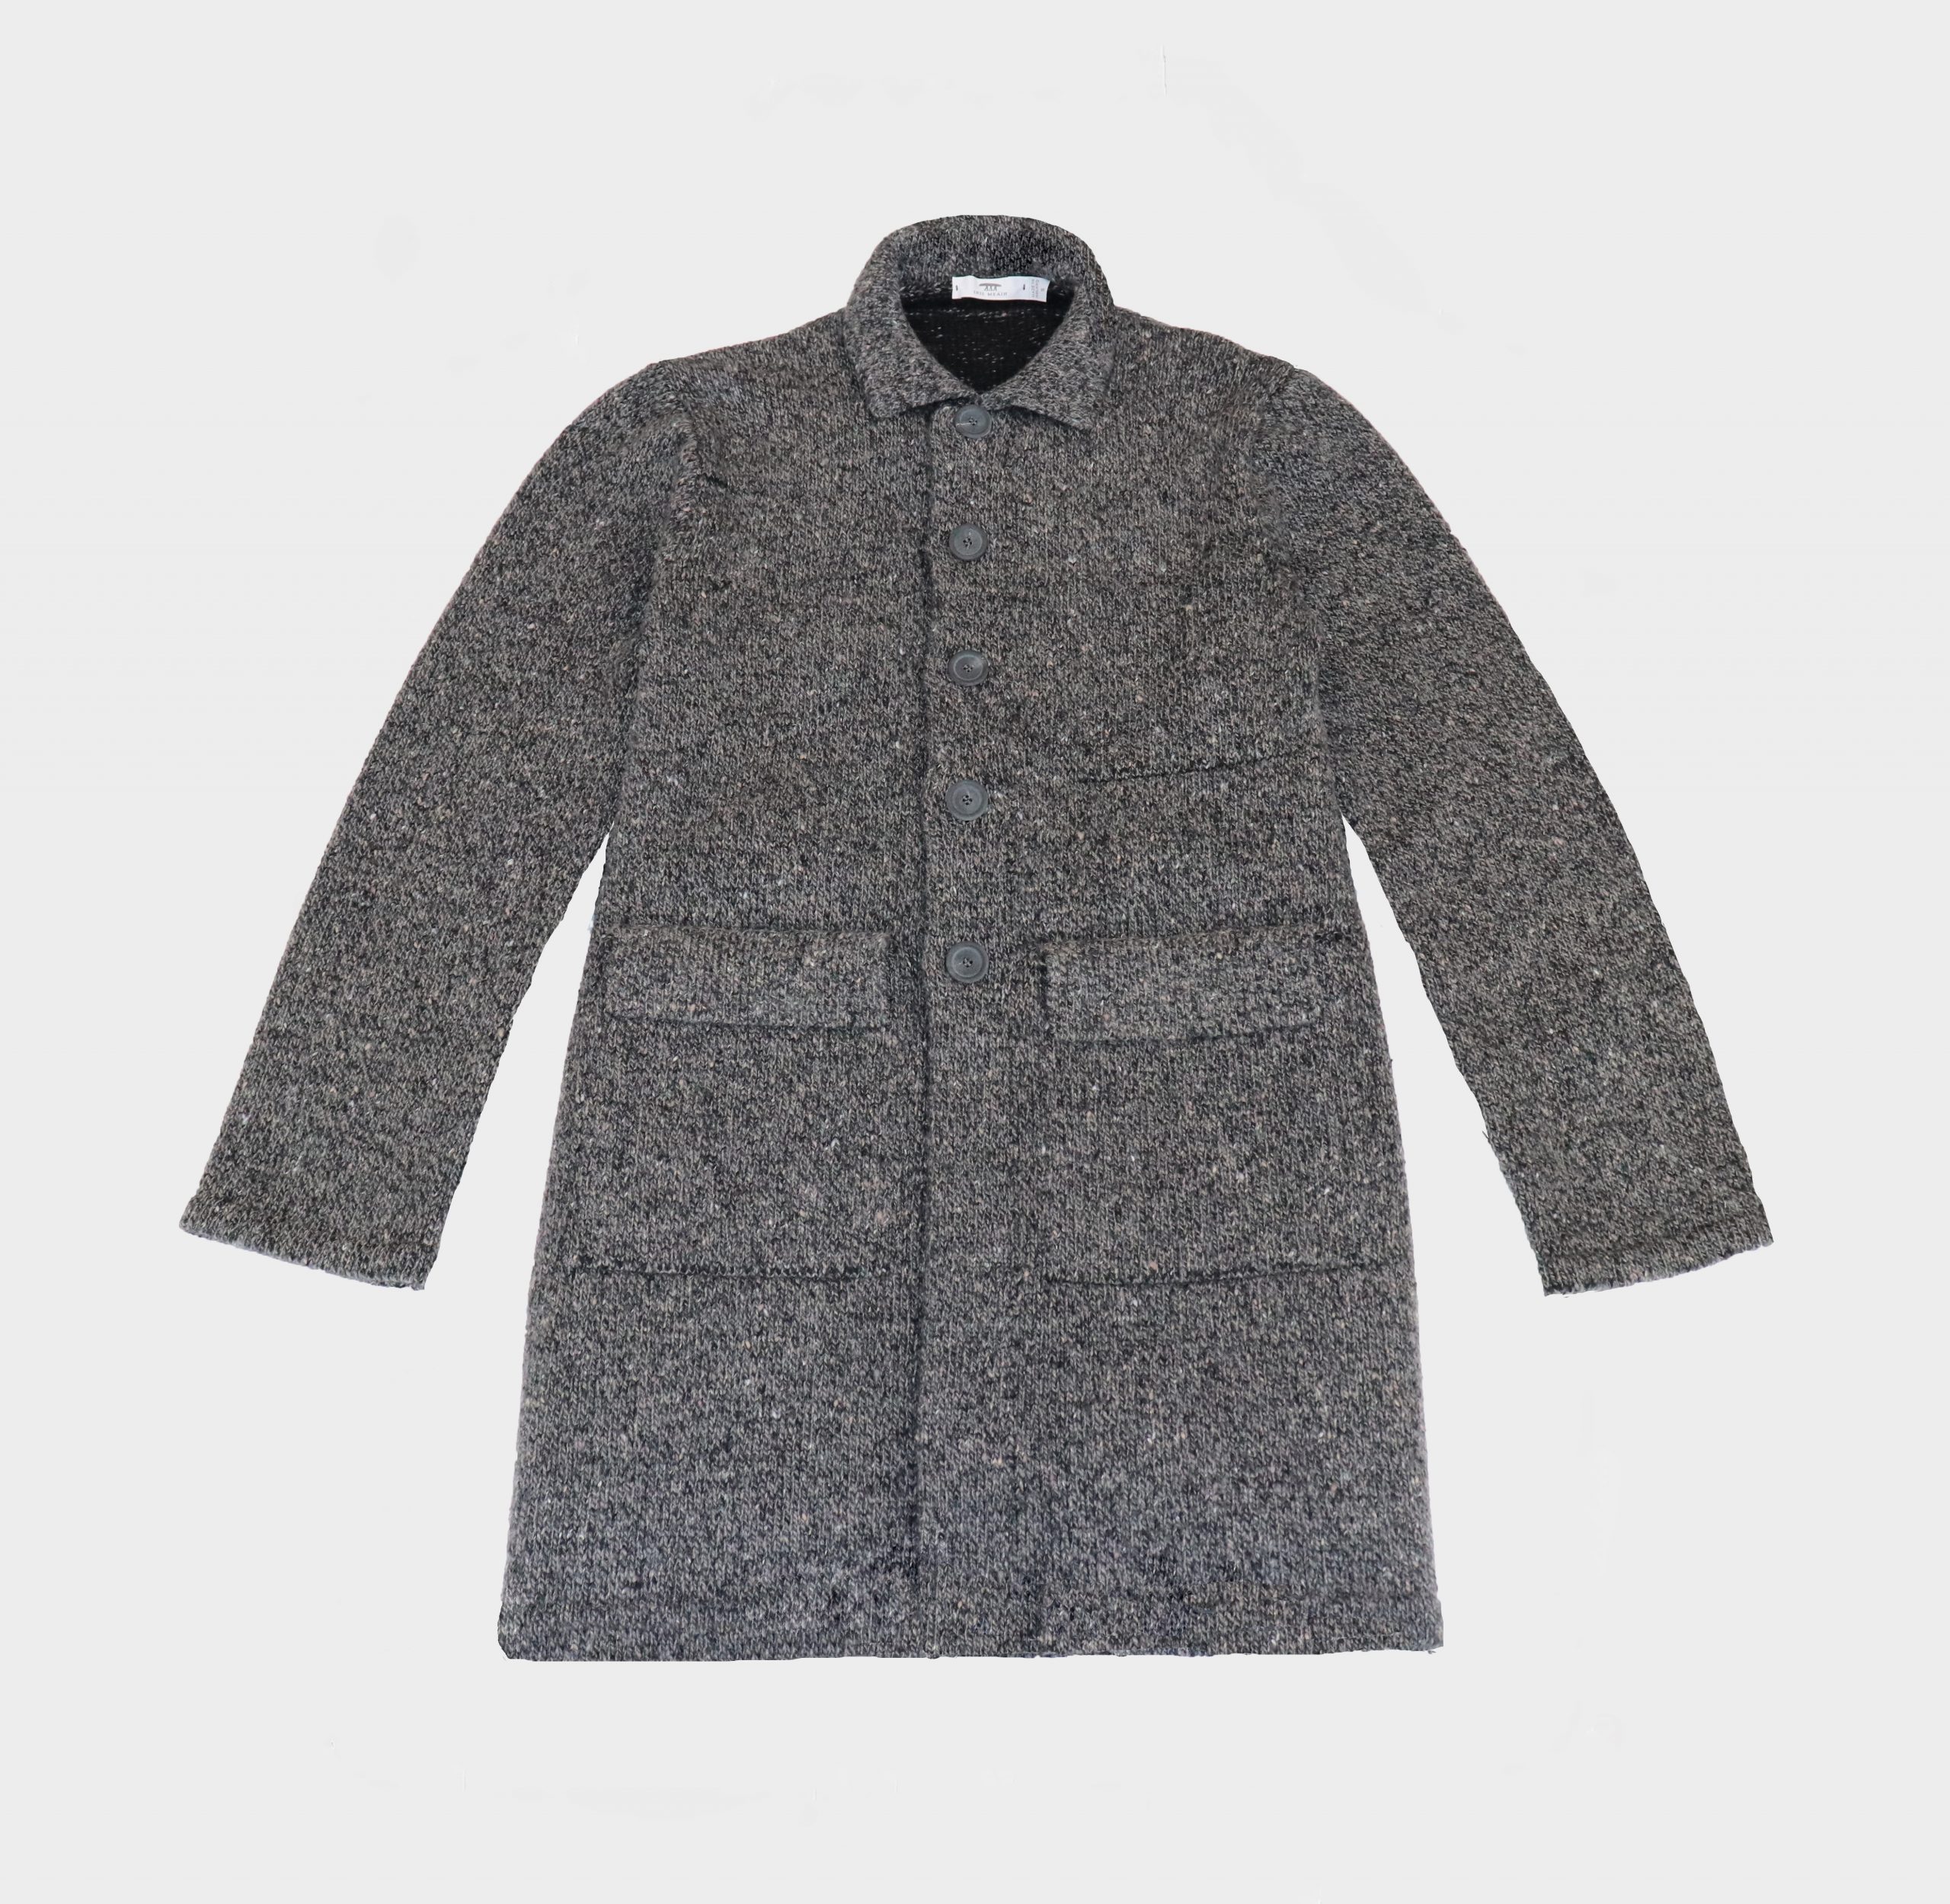 'Raftery' Knitted Coat in Black/Grey for Men | Inis Meáin Knitting Co.